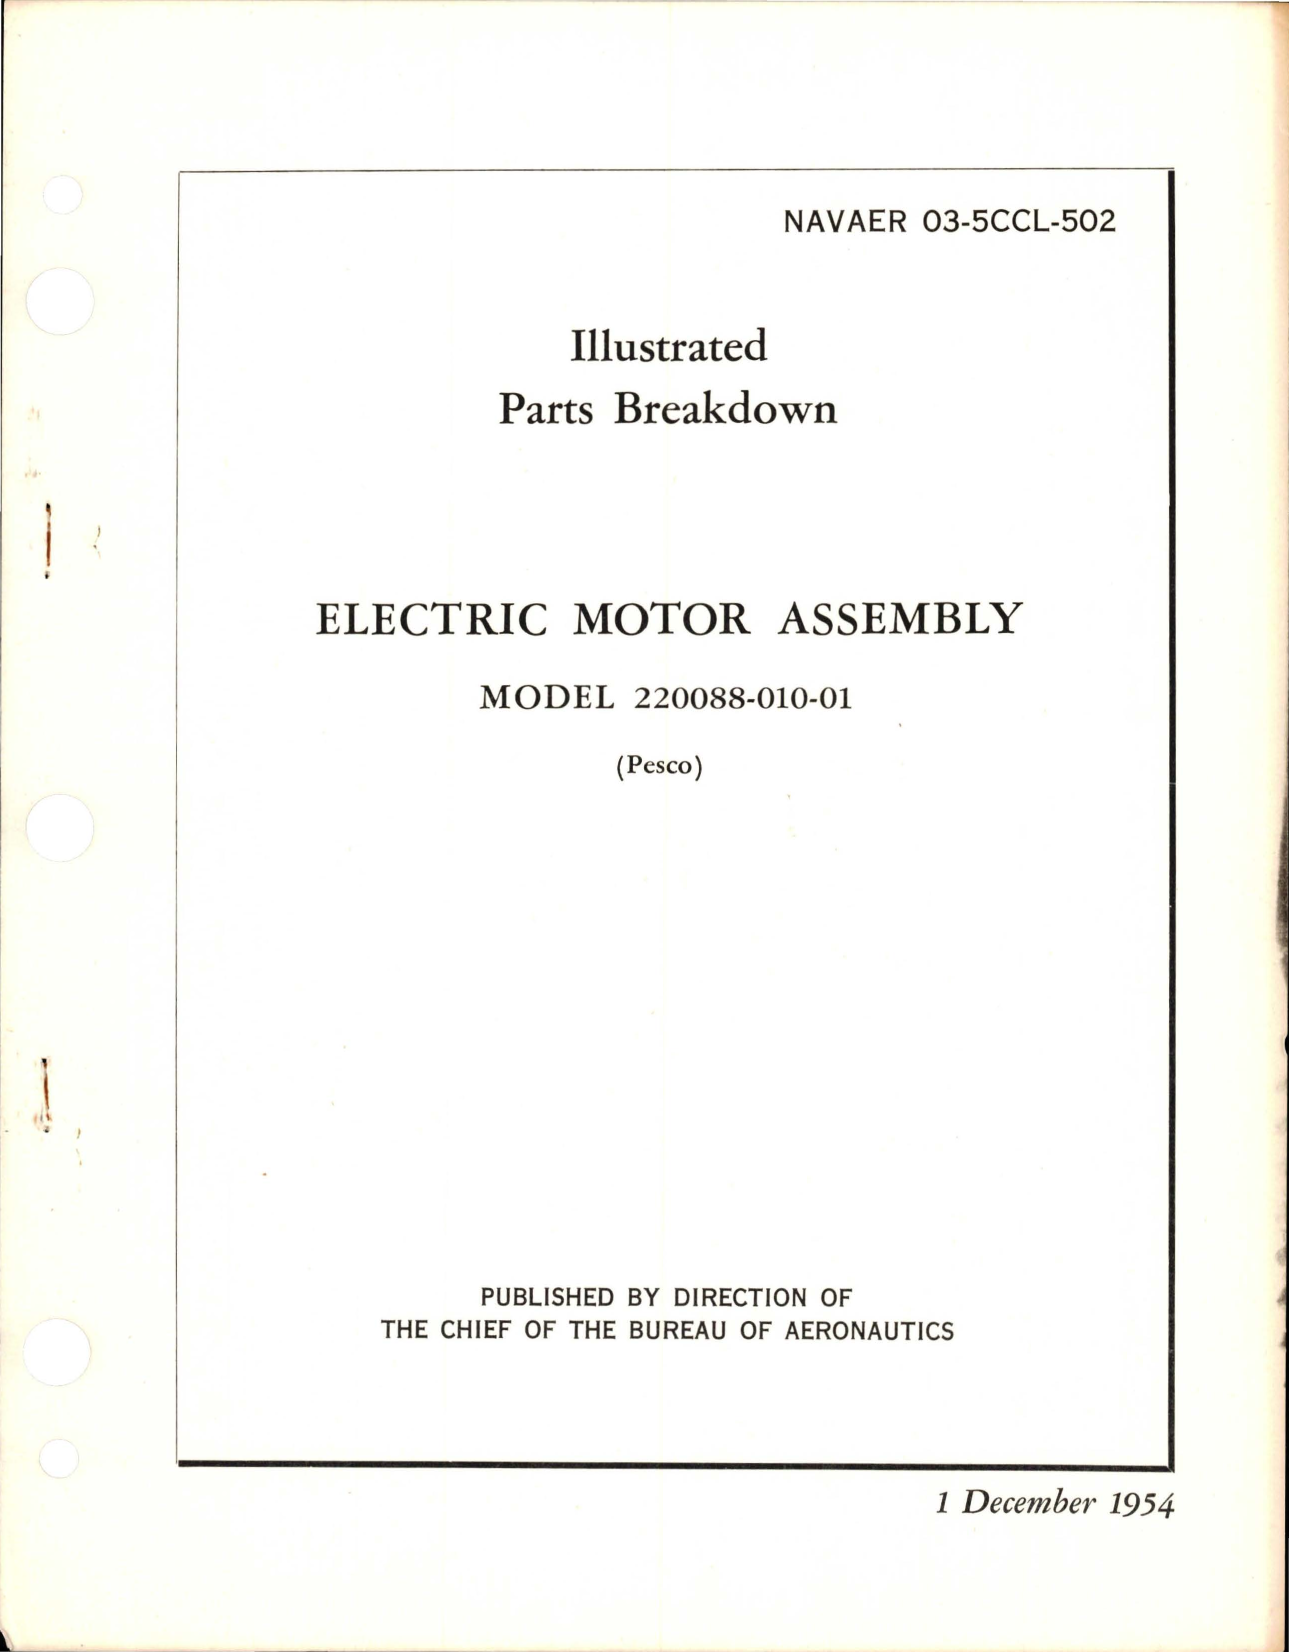 Sample page 1 from AirCorps Library document: Illustrated Parts Breakdown for Electric Motor Assembly - Model 220088-010-01